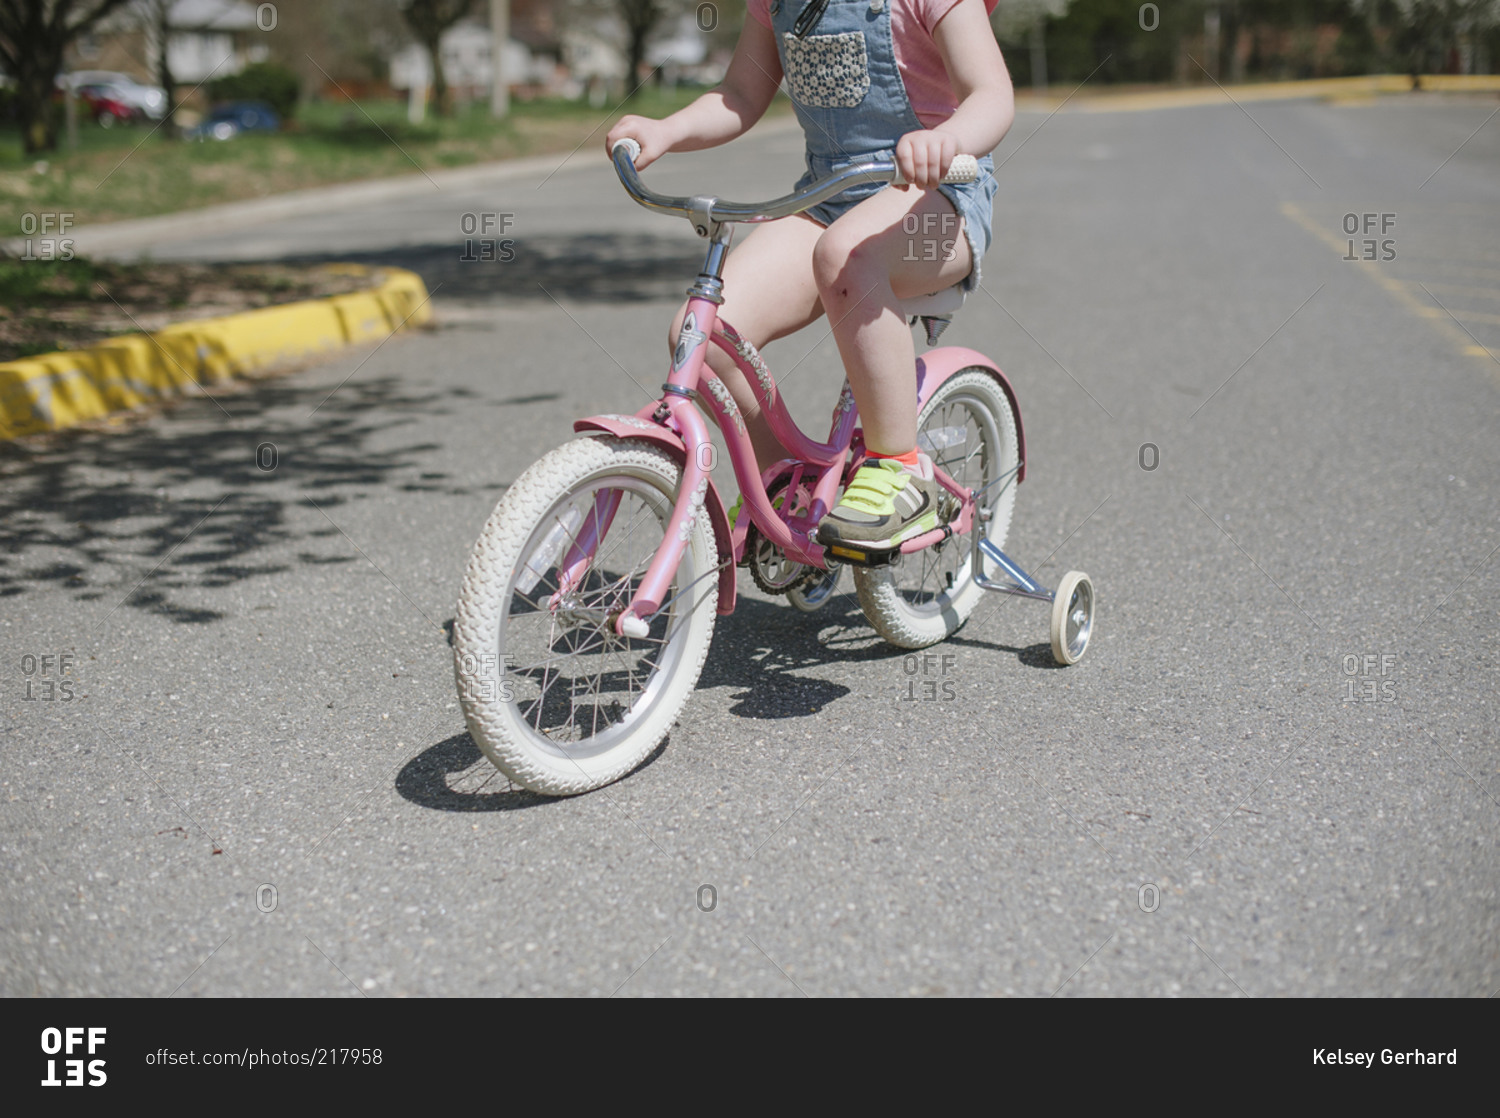 Closeup of a child riding a pink bicycle with training wheels